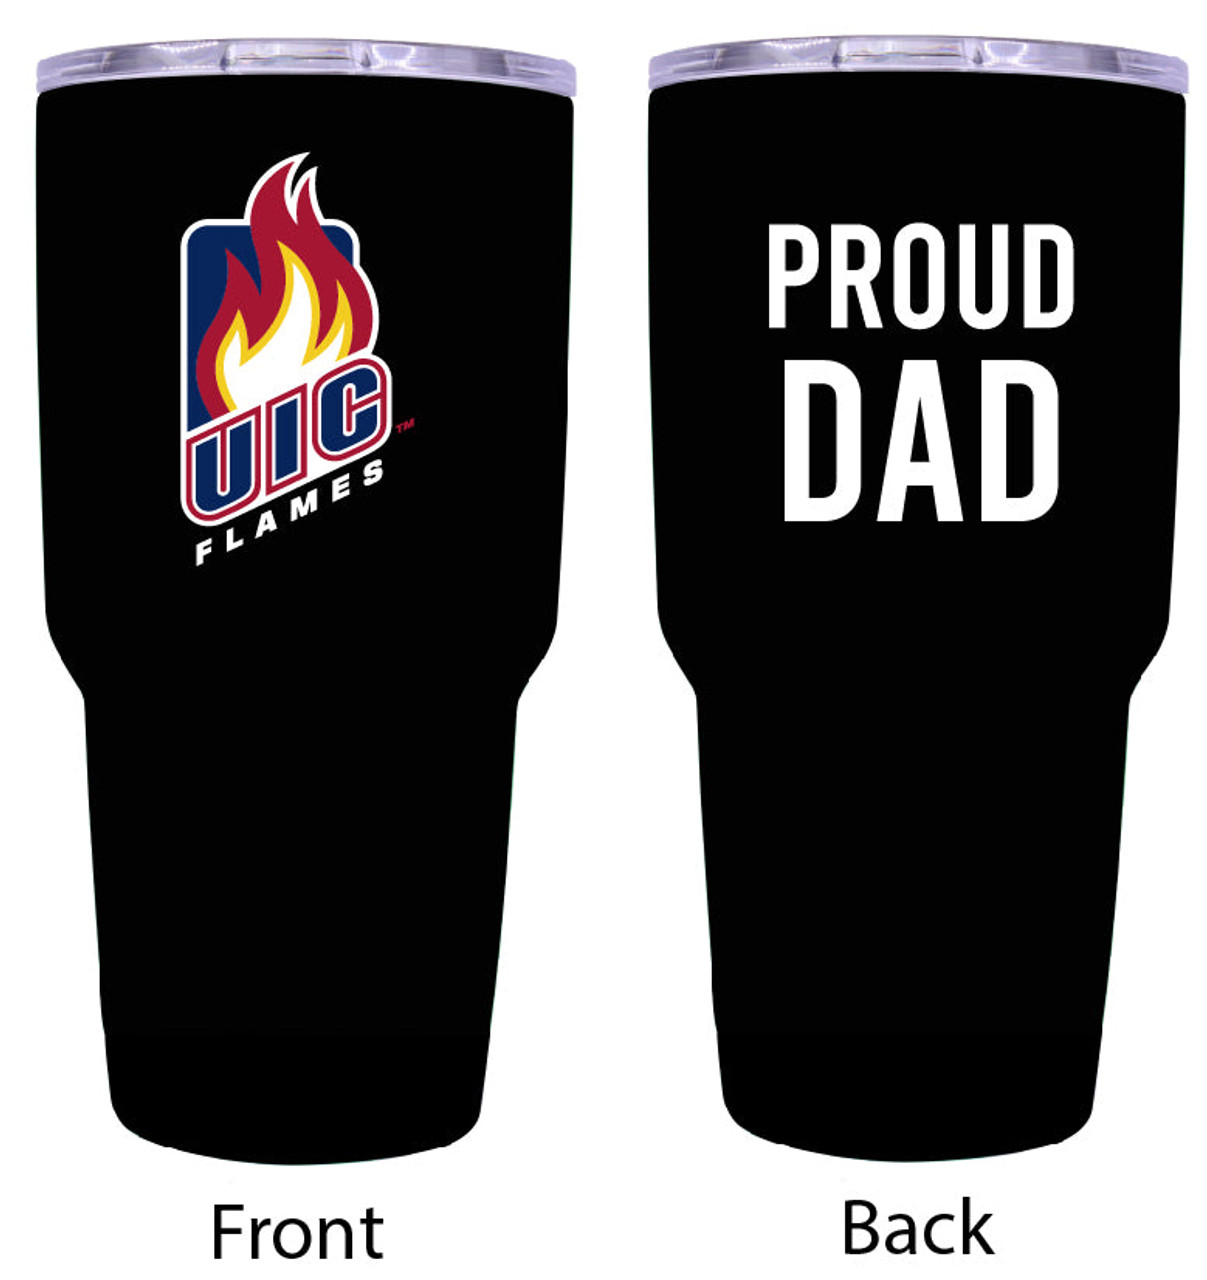 University of Illinois at Chicago Proud Dad 24 oz Insulated Stainless Steel Tumblers Choose Your Color.